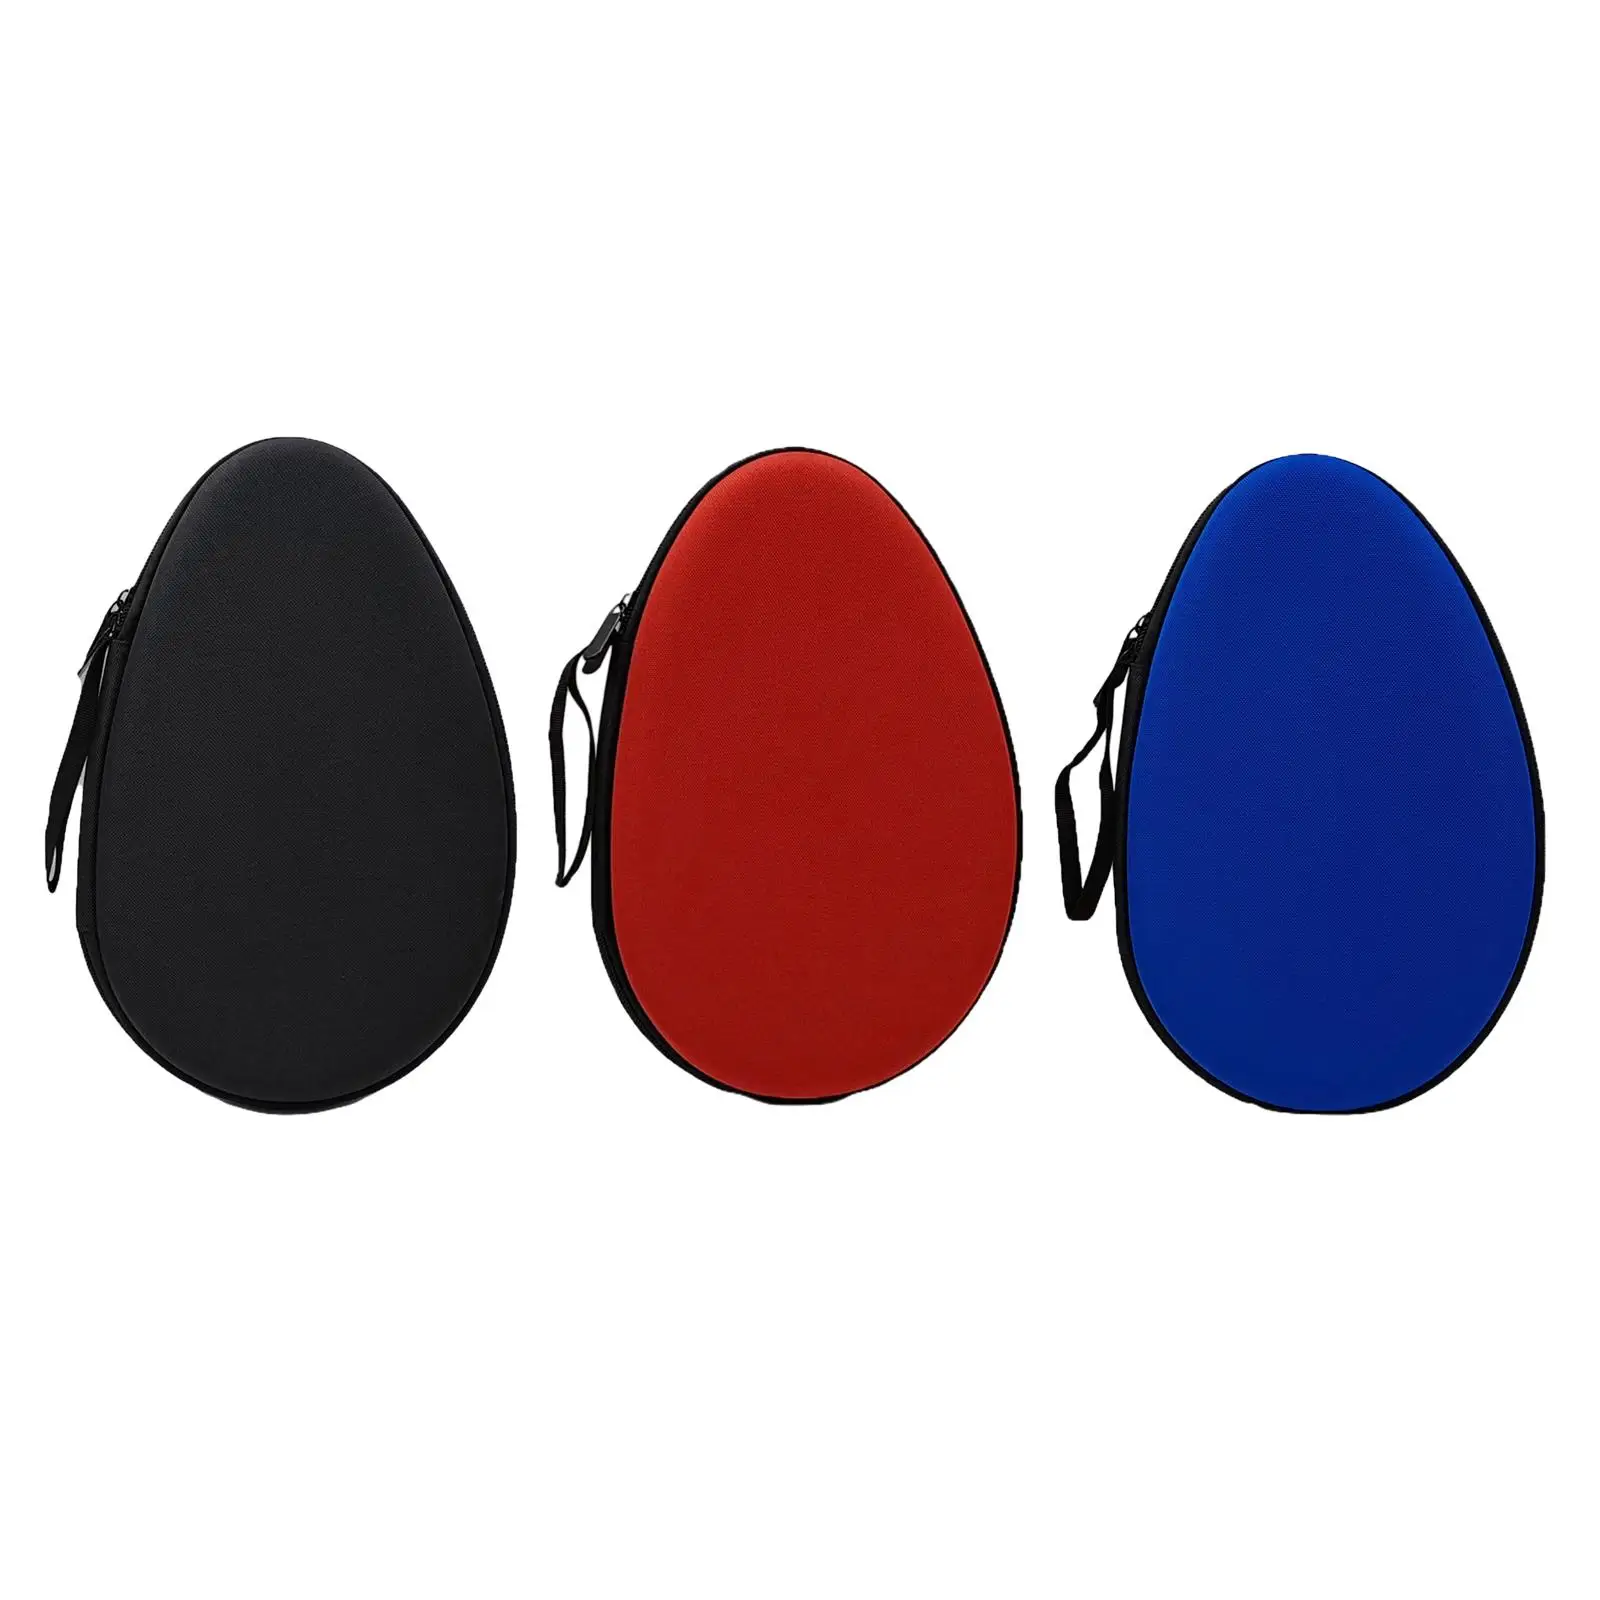 Table Tennis Racket Case Storage Case Sturdy for Competition Indoor Outdoor